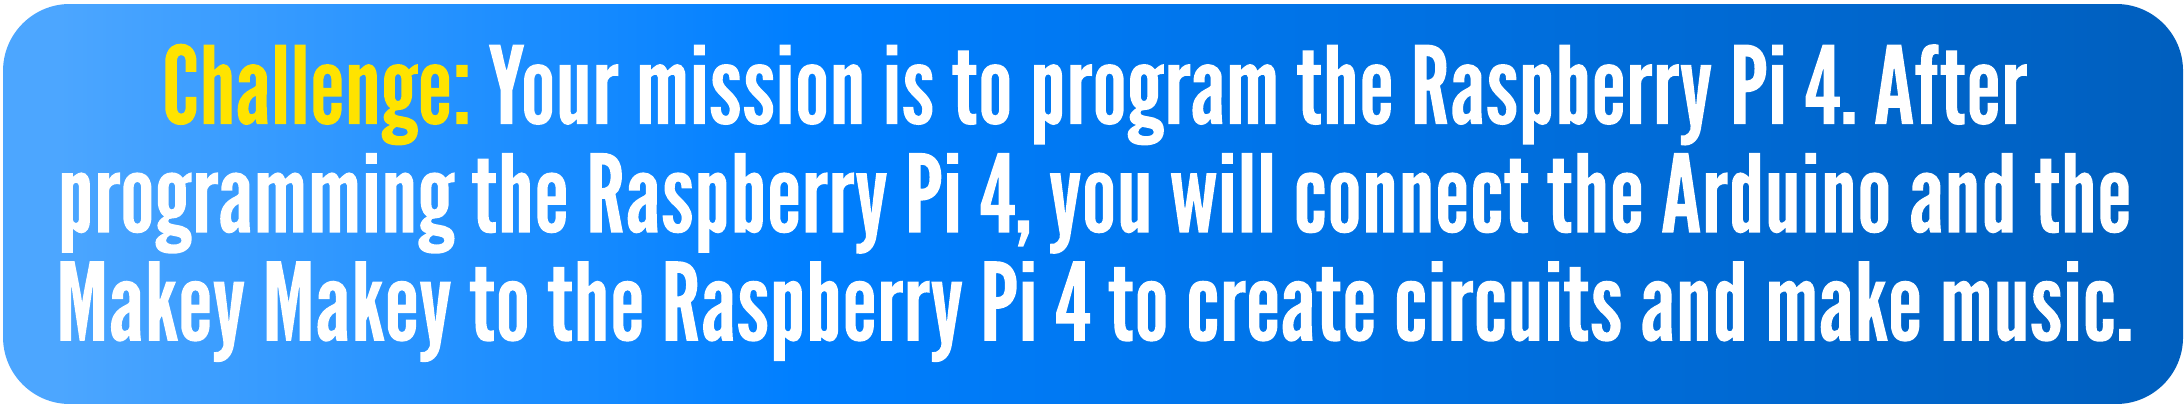 Challenge: Your mission is to program the Raspberry Pi 4. After programming the Raspberry Pi 4, you will connect the Arduino and the Makey Makey to the Raspberry Pi 4 to create circuits and make music. 